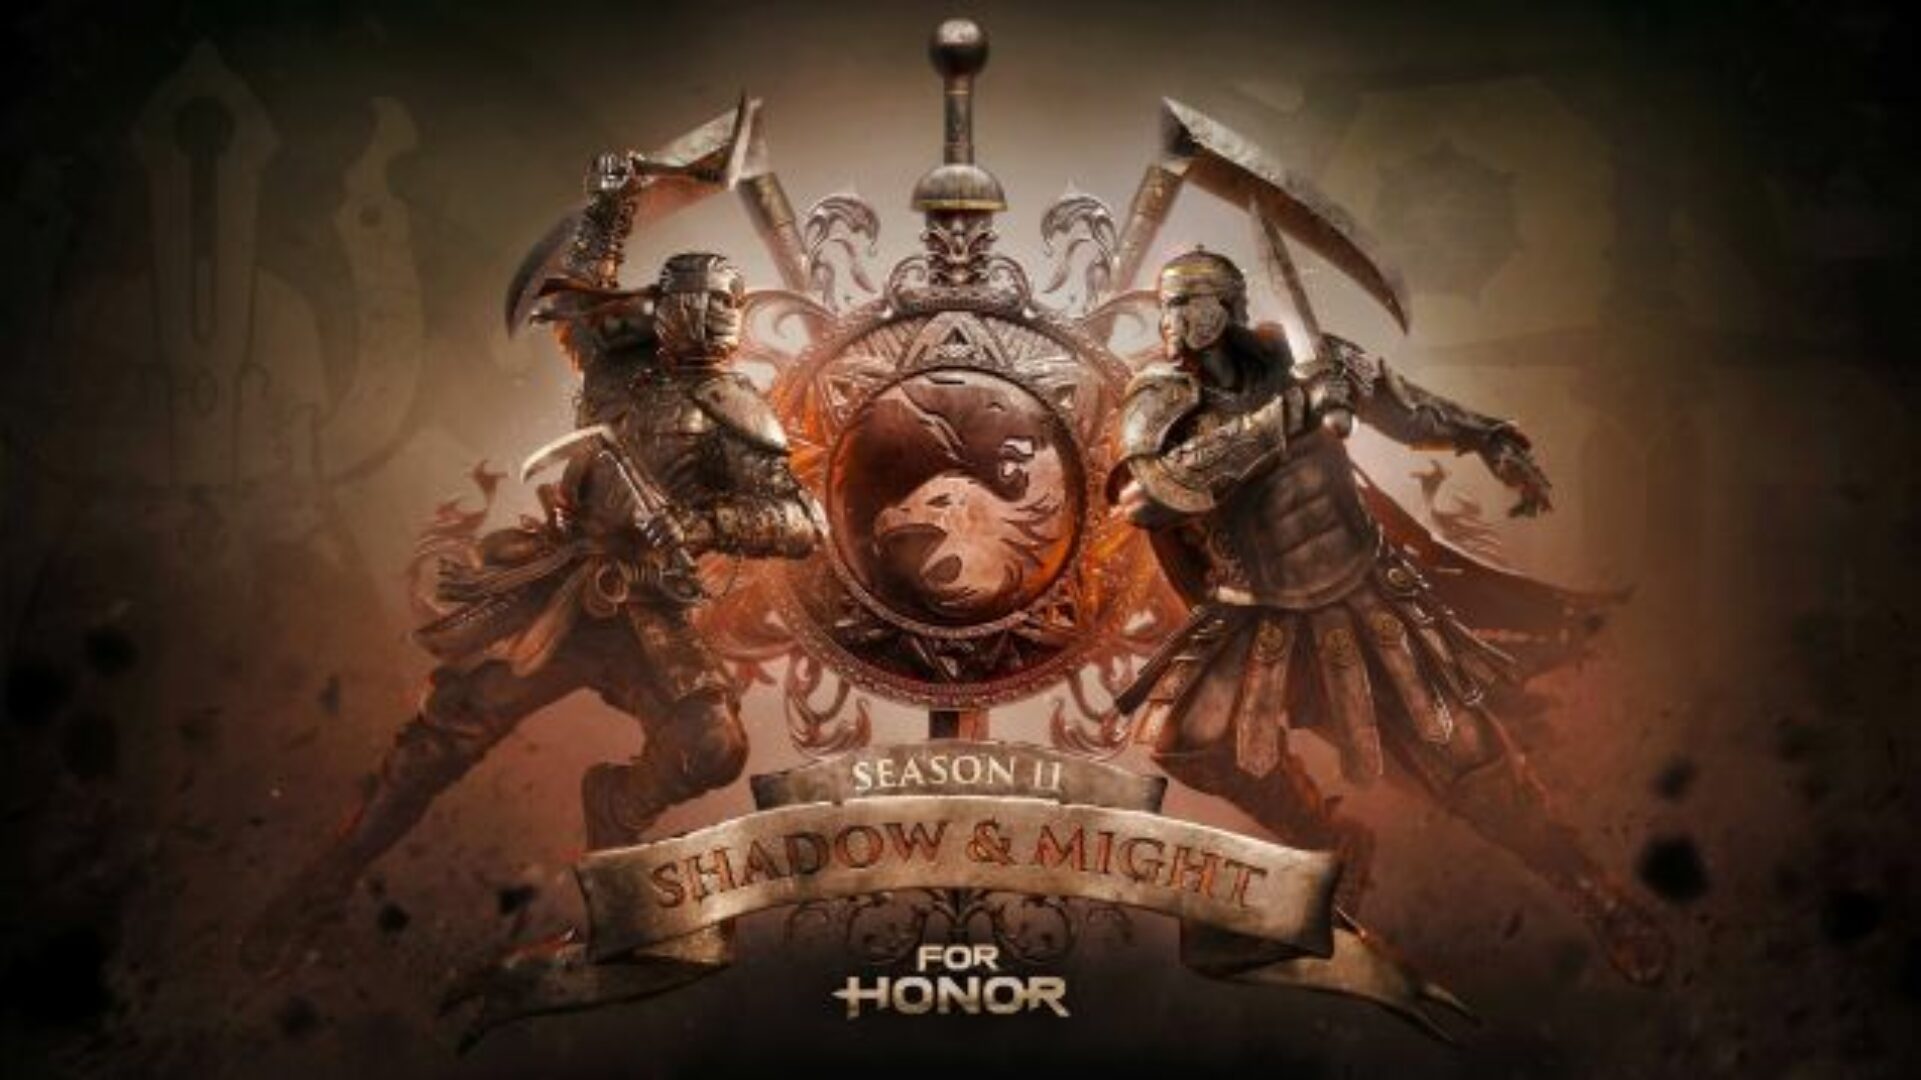 For Honor Shadow and Might Content Preview on May 15th